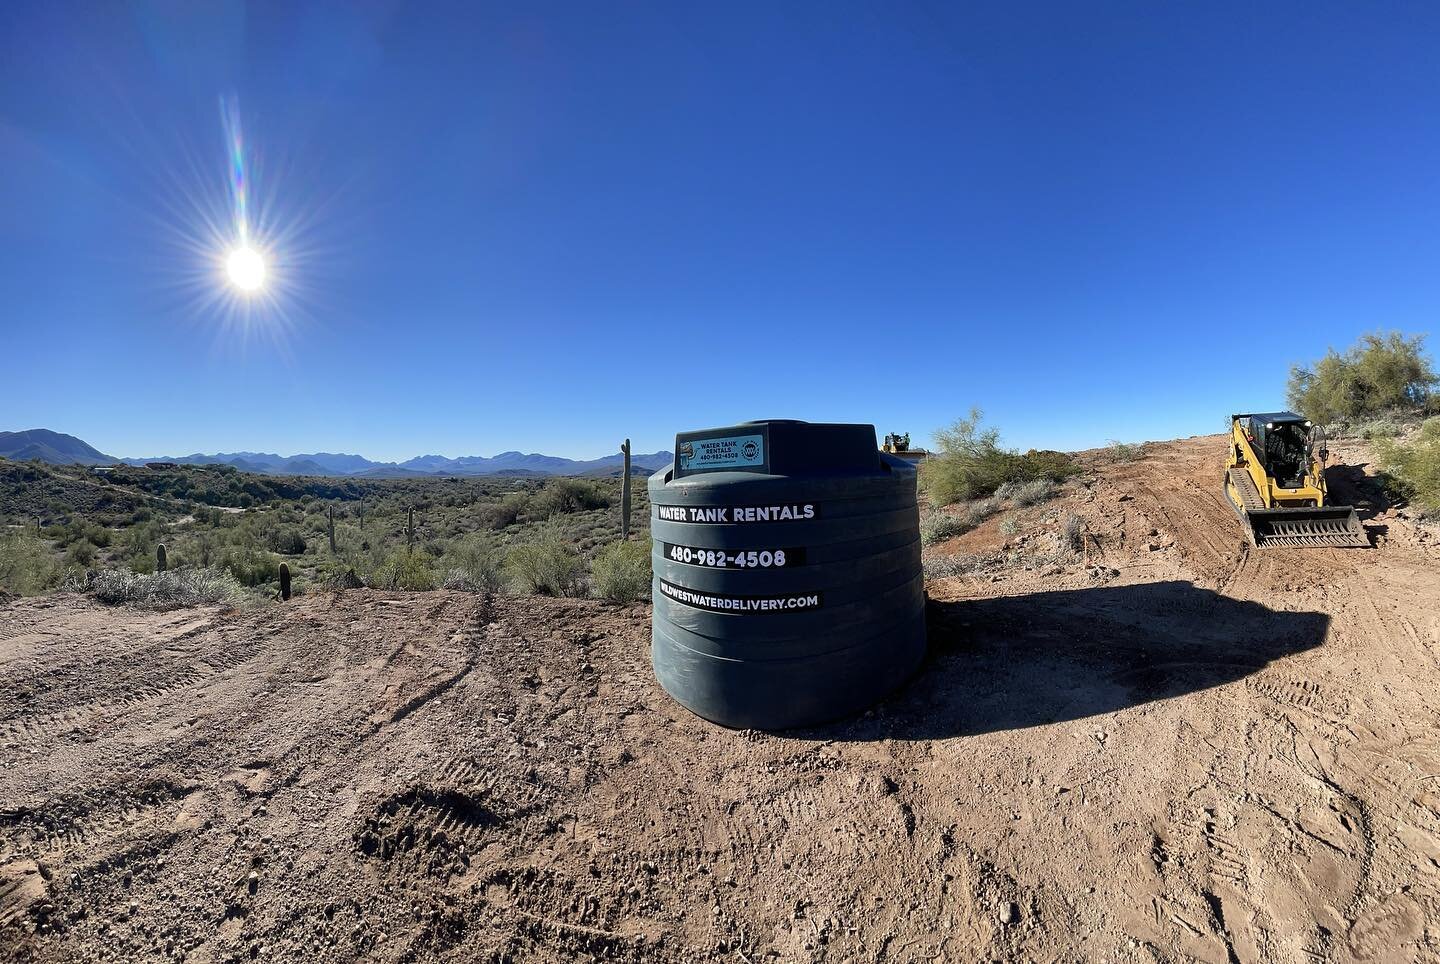 Dropped another tank/pump out on a hillside in Ft McDowell 💦
&bull;
The guys over @red_hawk_construction are knocking out some dirt work on this hilltop for the customer🤘🏻
#wildwestwaterdelivery #tankrentals #potablewater #watertruck